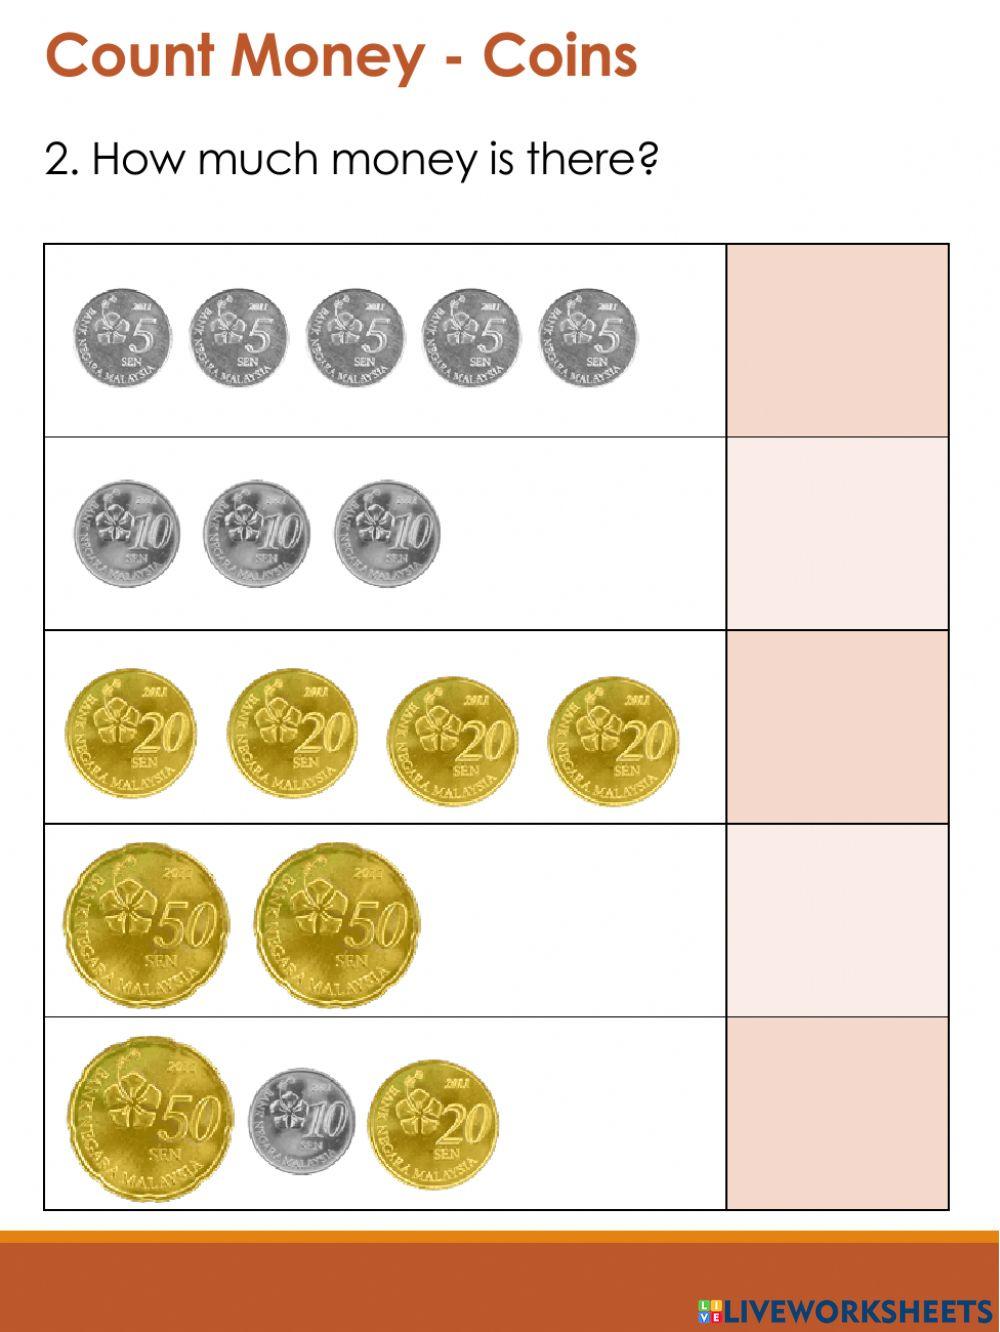 Counting Coins (Malaysian Money)